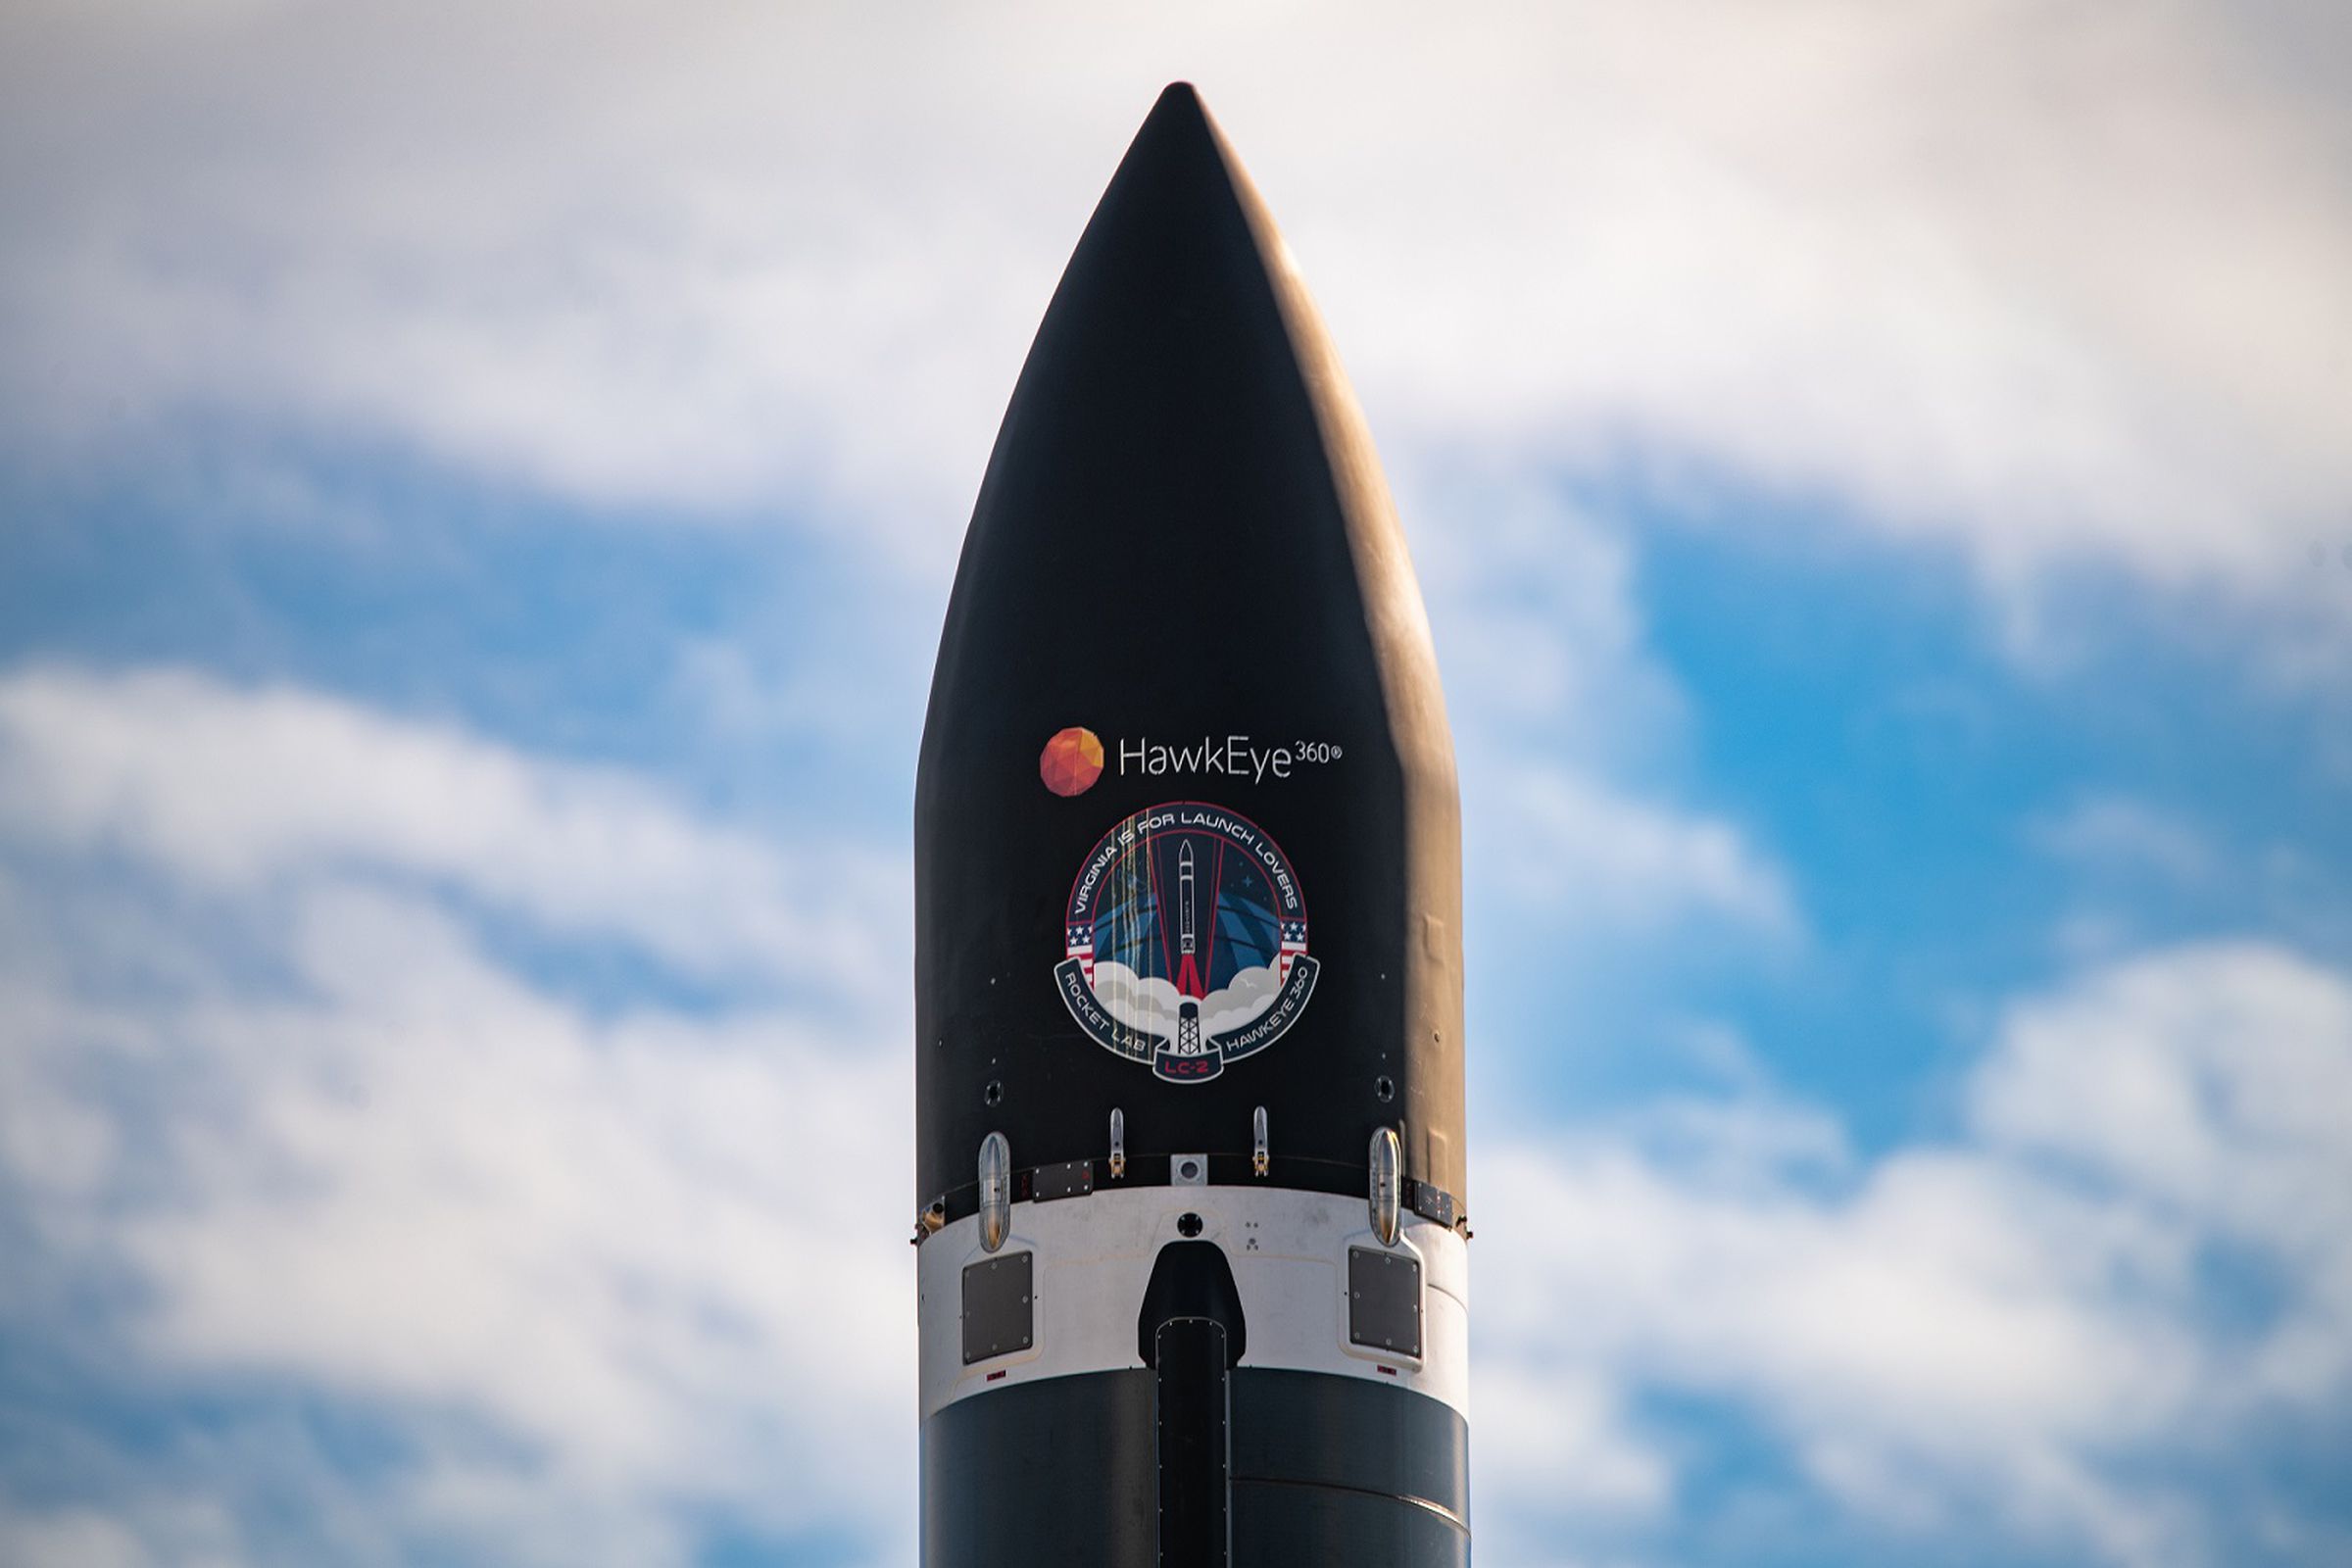 The top of Rocket Lab’s Electron rocket displaying the company logo for HawkEye 360